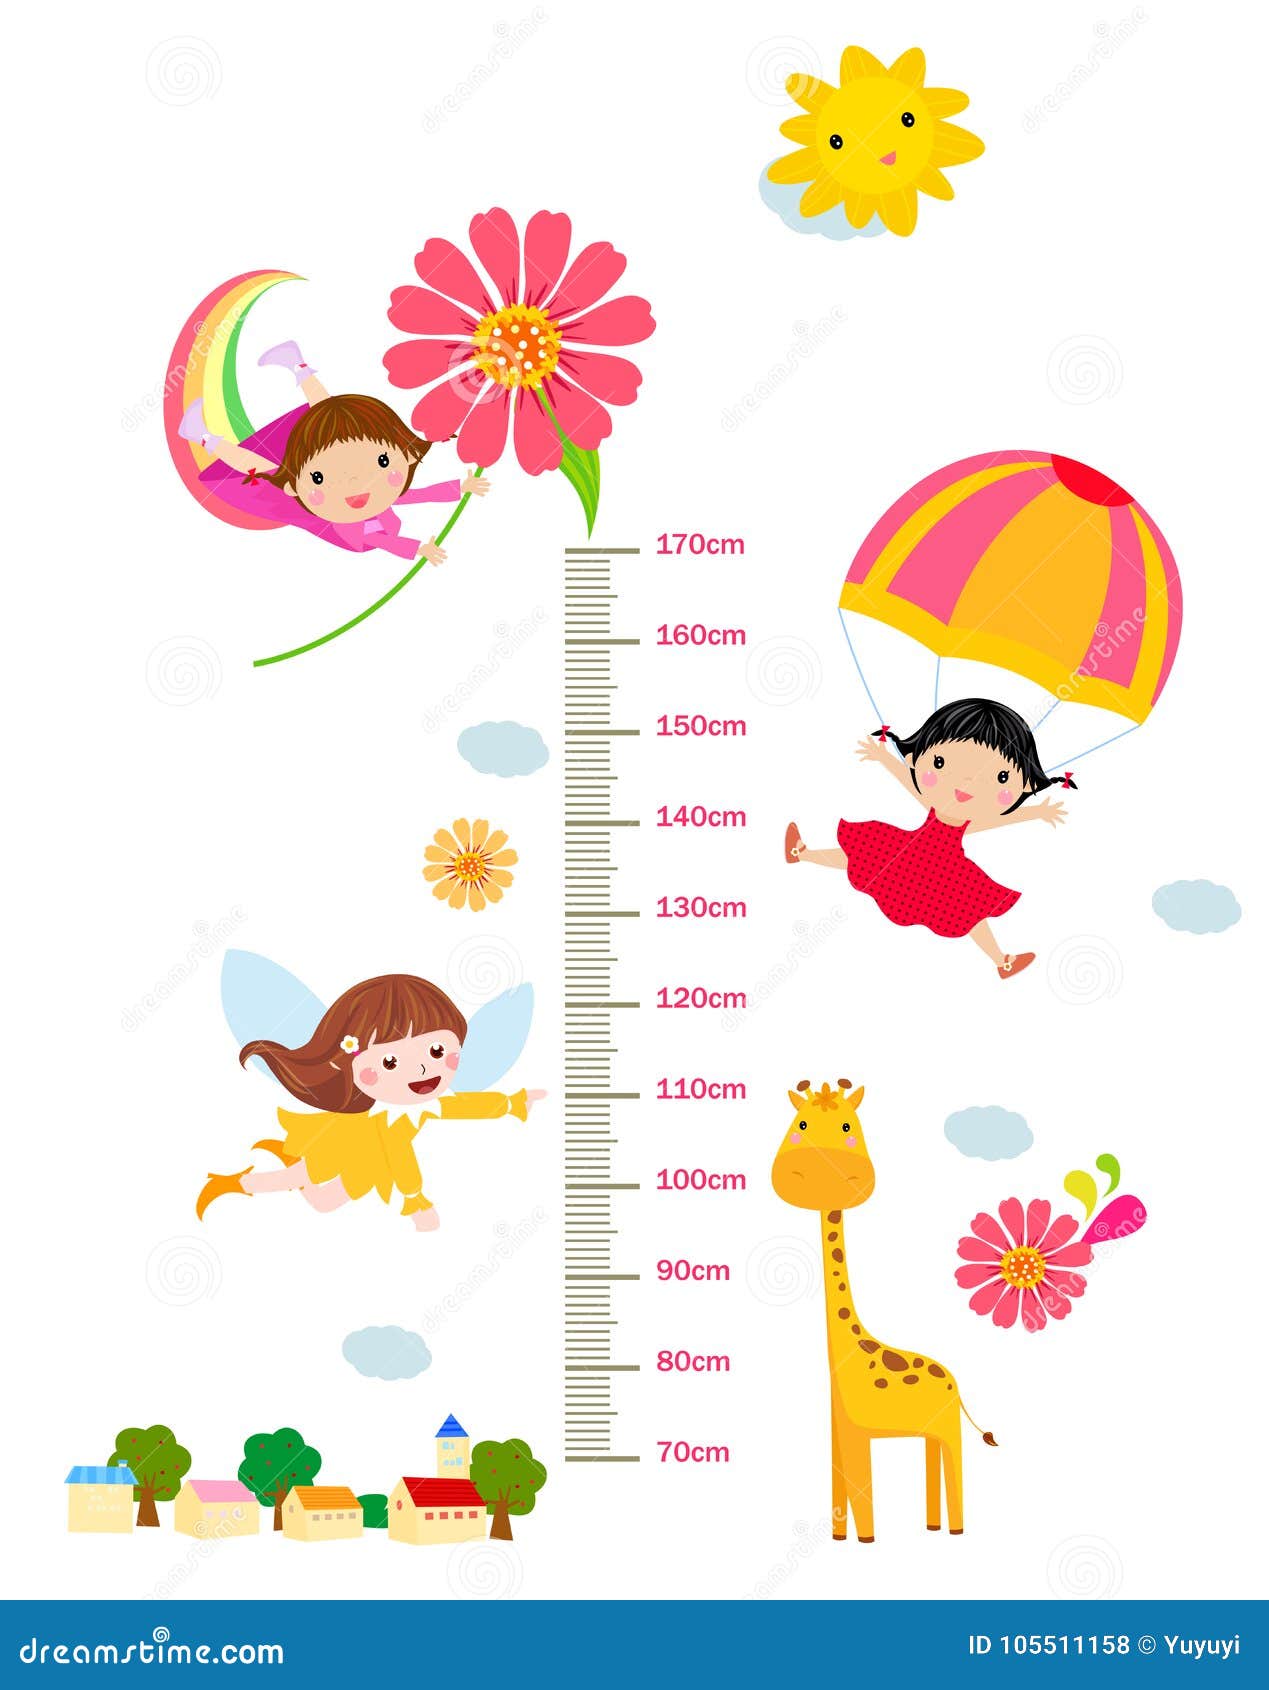 Kids Height Scale with Funny Animals and Children Stock Vector ...